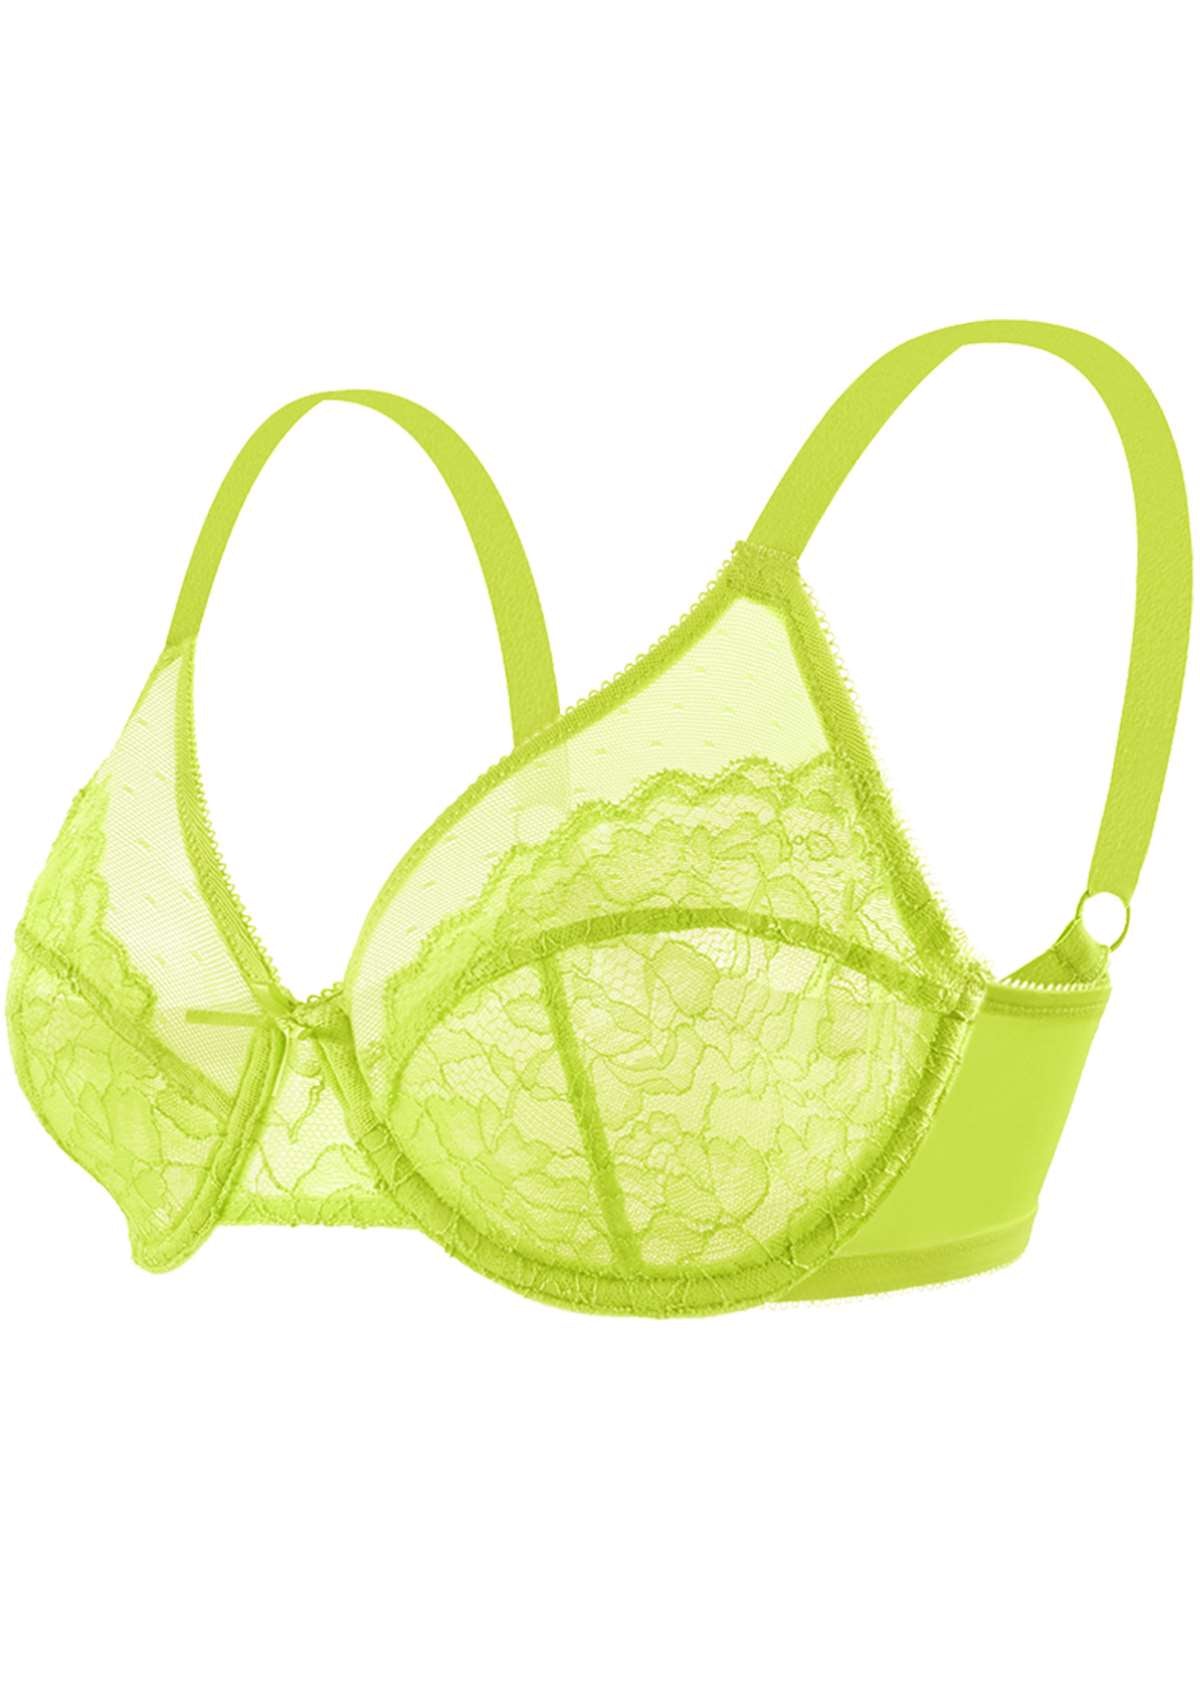 HSIA Enchante Full Cup Minimizing Bra: Supportive Unlined Lace Bra - Lime Green / 44 / G